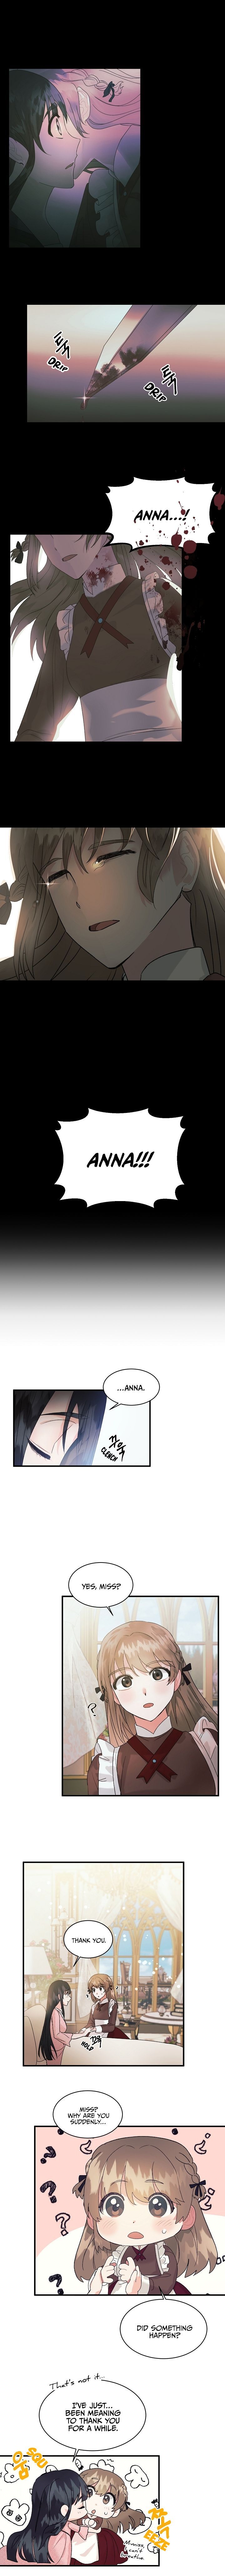 Angel or Villainess chapter 2 - Page 5